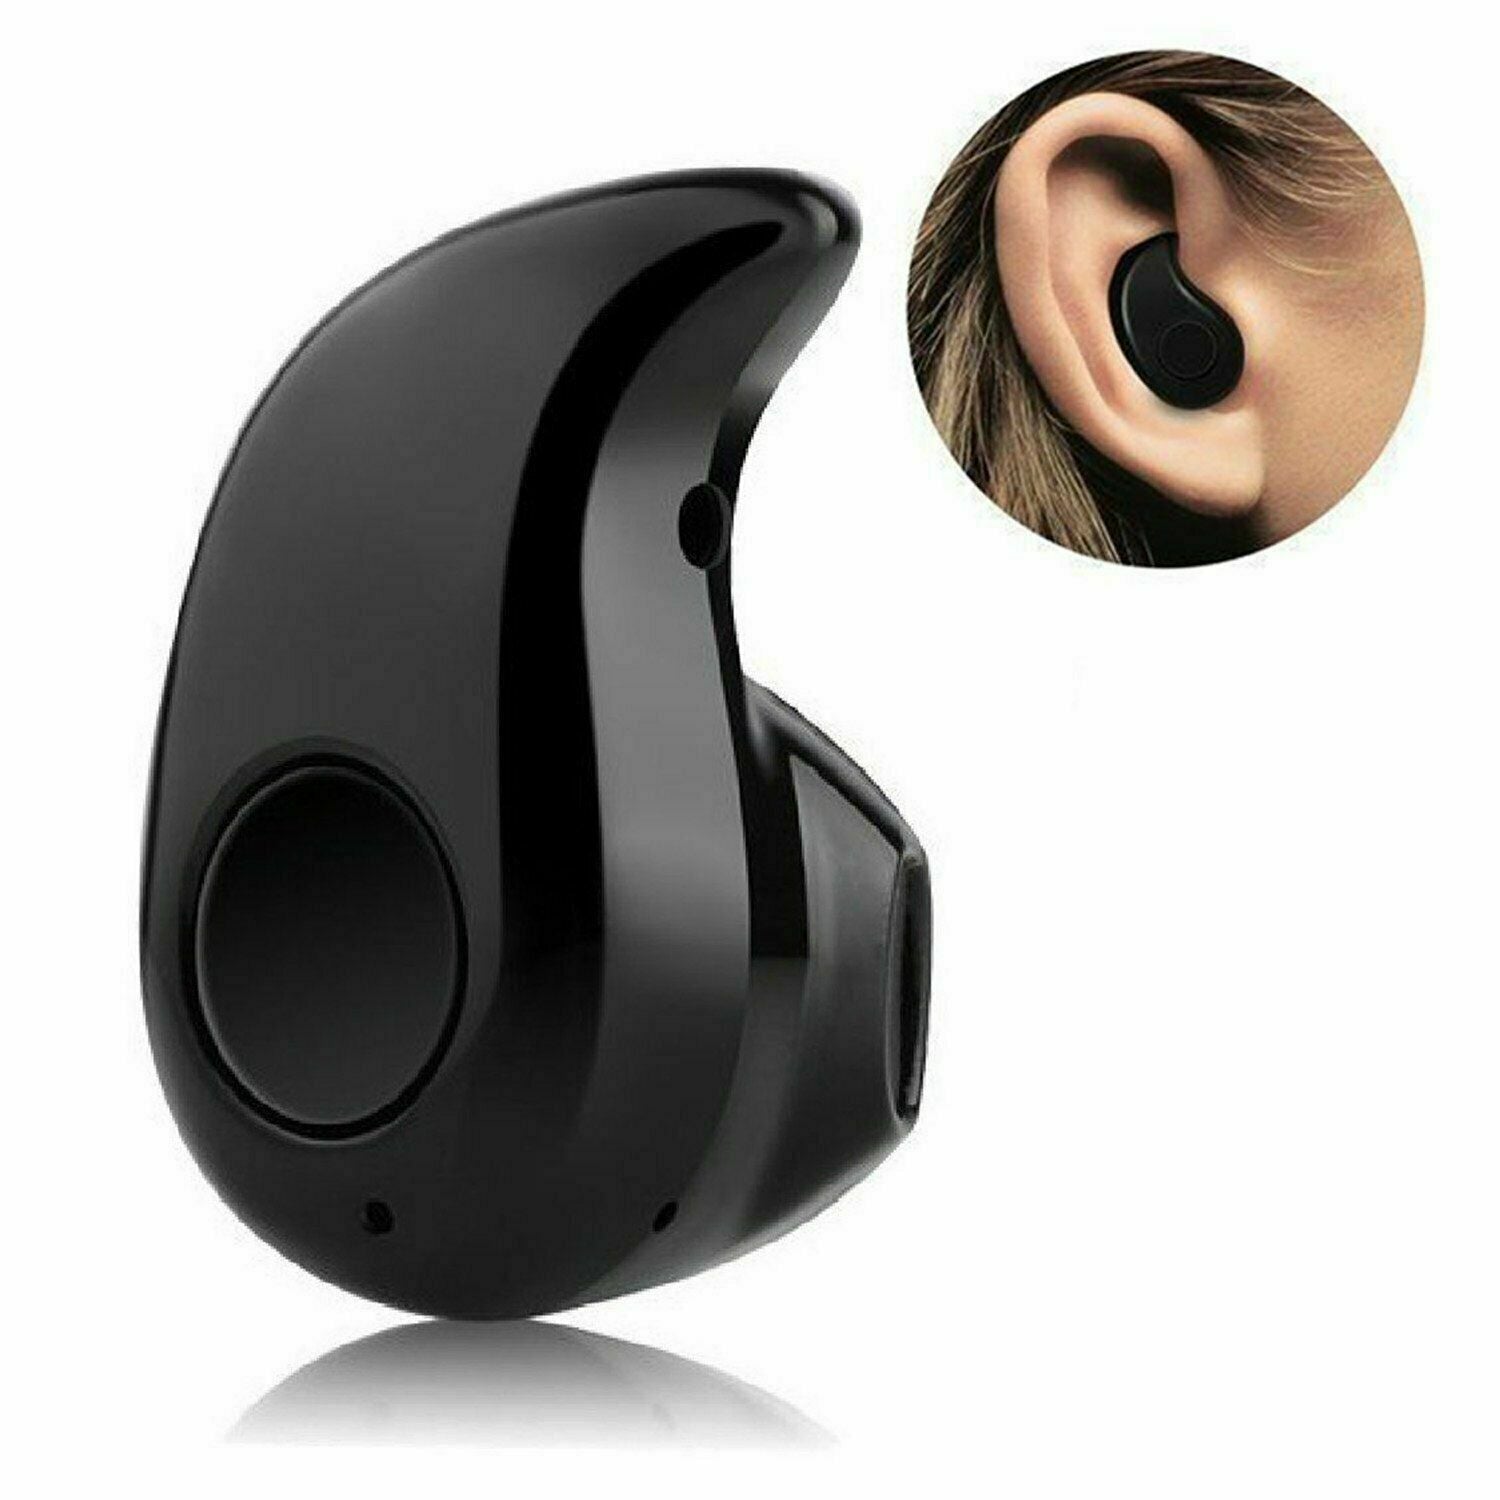 Wireless Bluetooth Earphones Headphones Earbuds for Samsung Android Apple iPhone